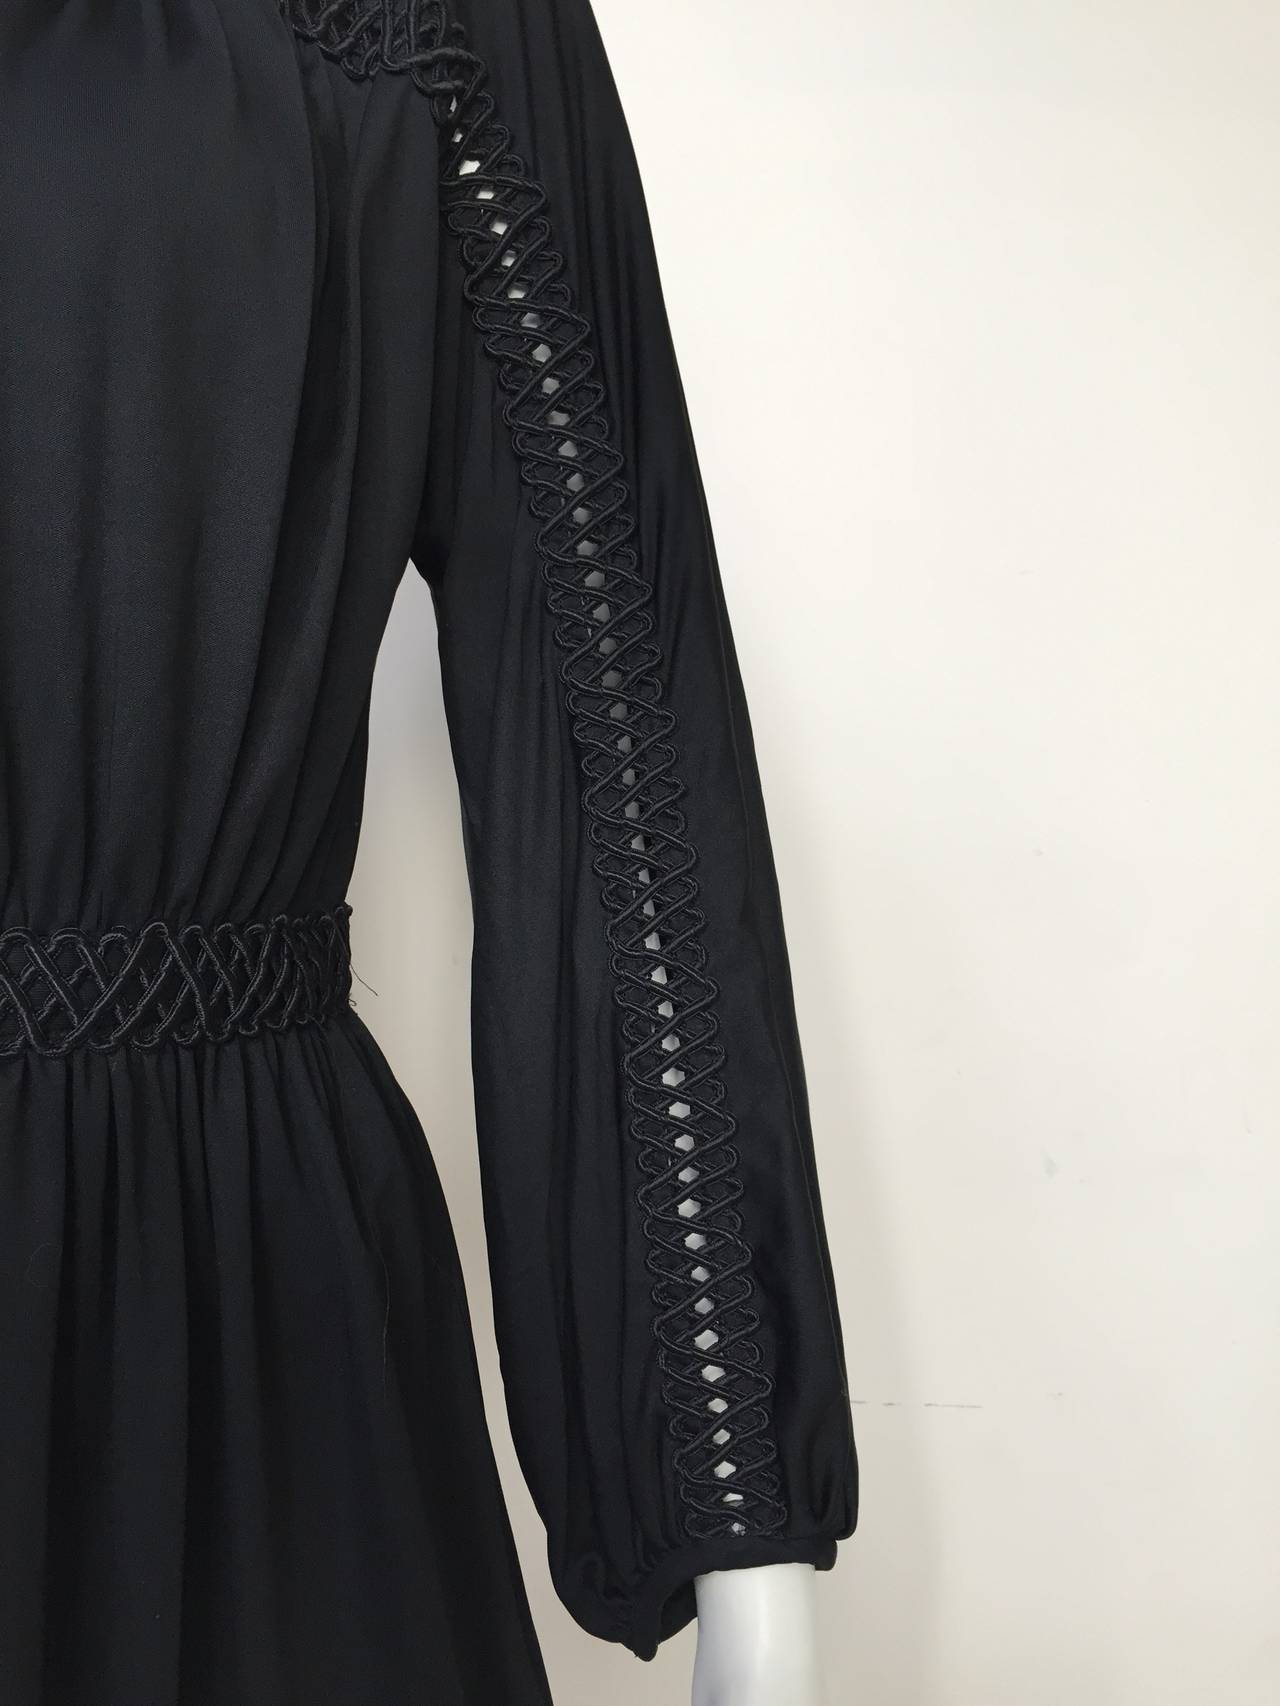 Women's Donald Brooks 70s Black Dress with Pockets Size 6. For Sale